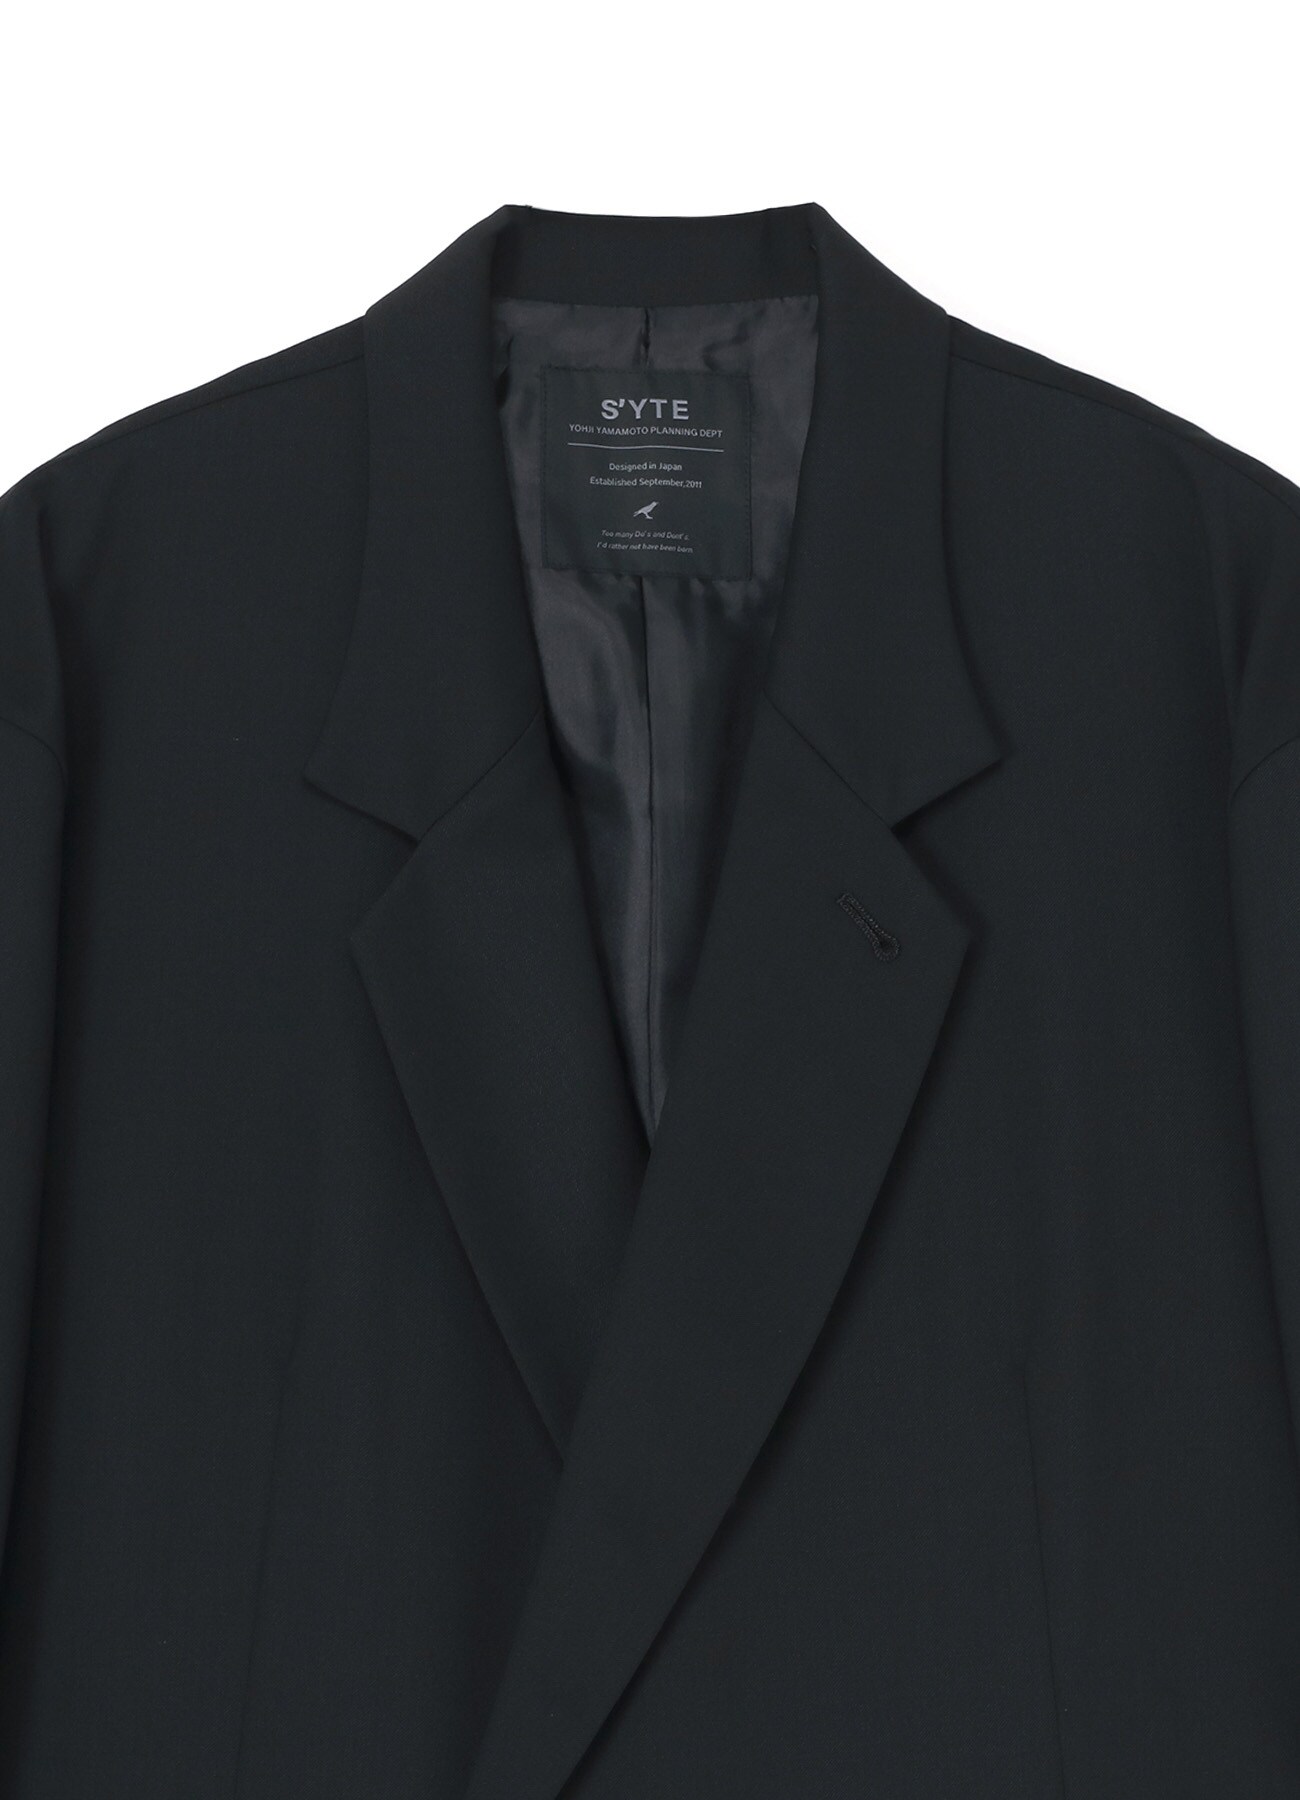 T/W GABARDINE DOUBLE-BREASTED JACKET WITH IRREGULAR BUTTONING